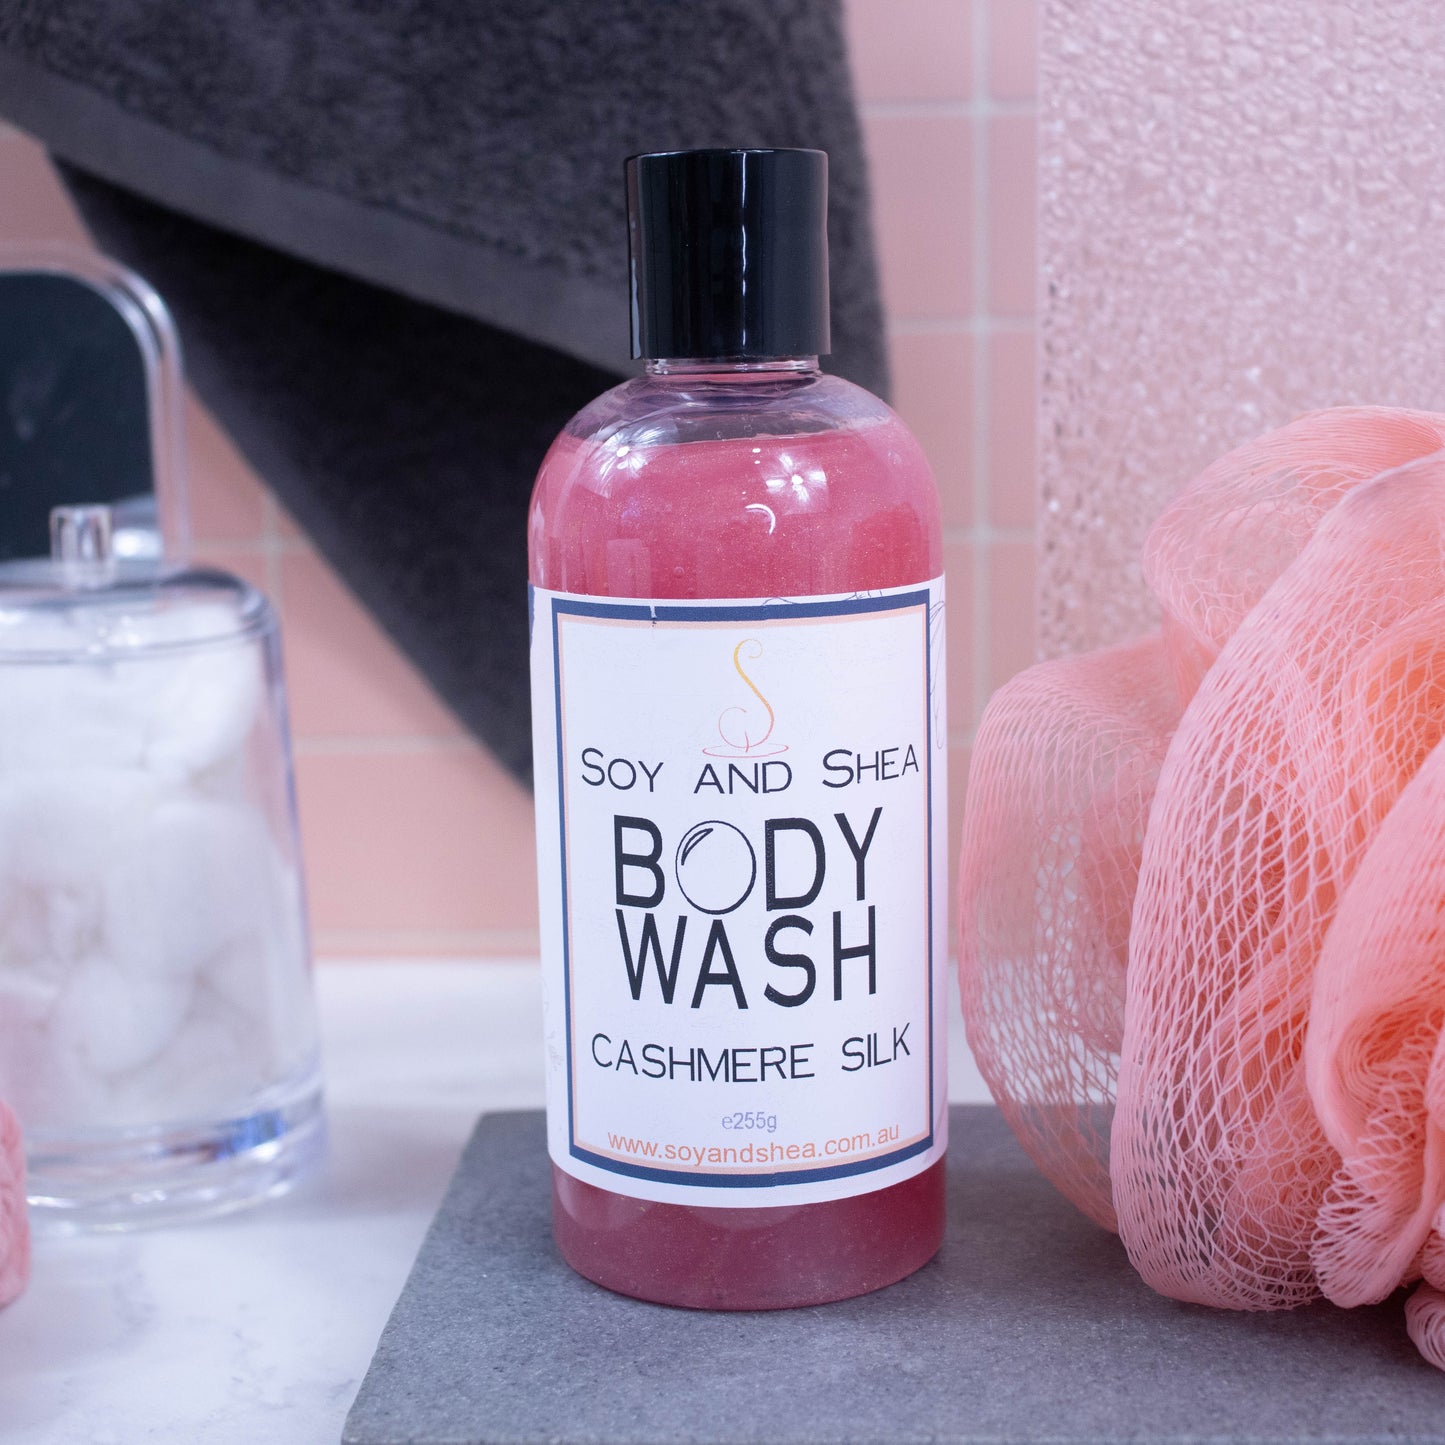 A bottle of Body wash sits on a stone bench.  It is a dark pink liquid and the bottle has a disc cap.  Next to the bottle is a shower sponge  and a towel handing in the background